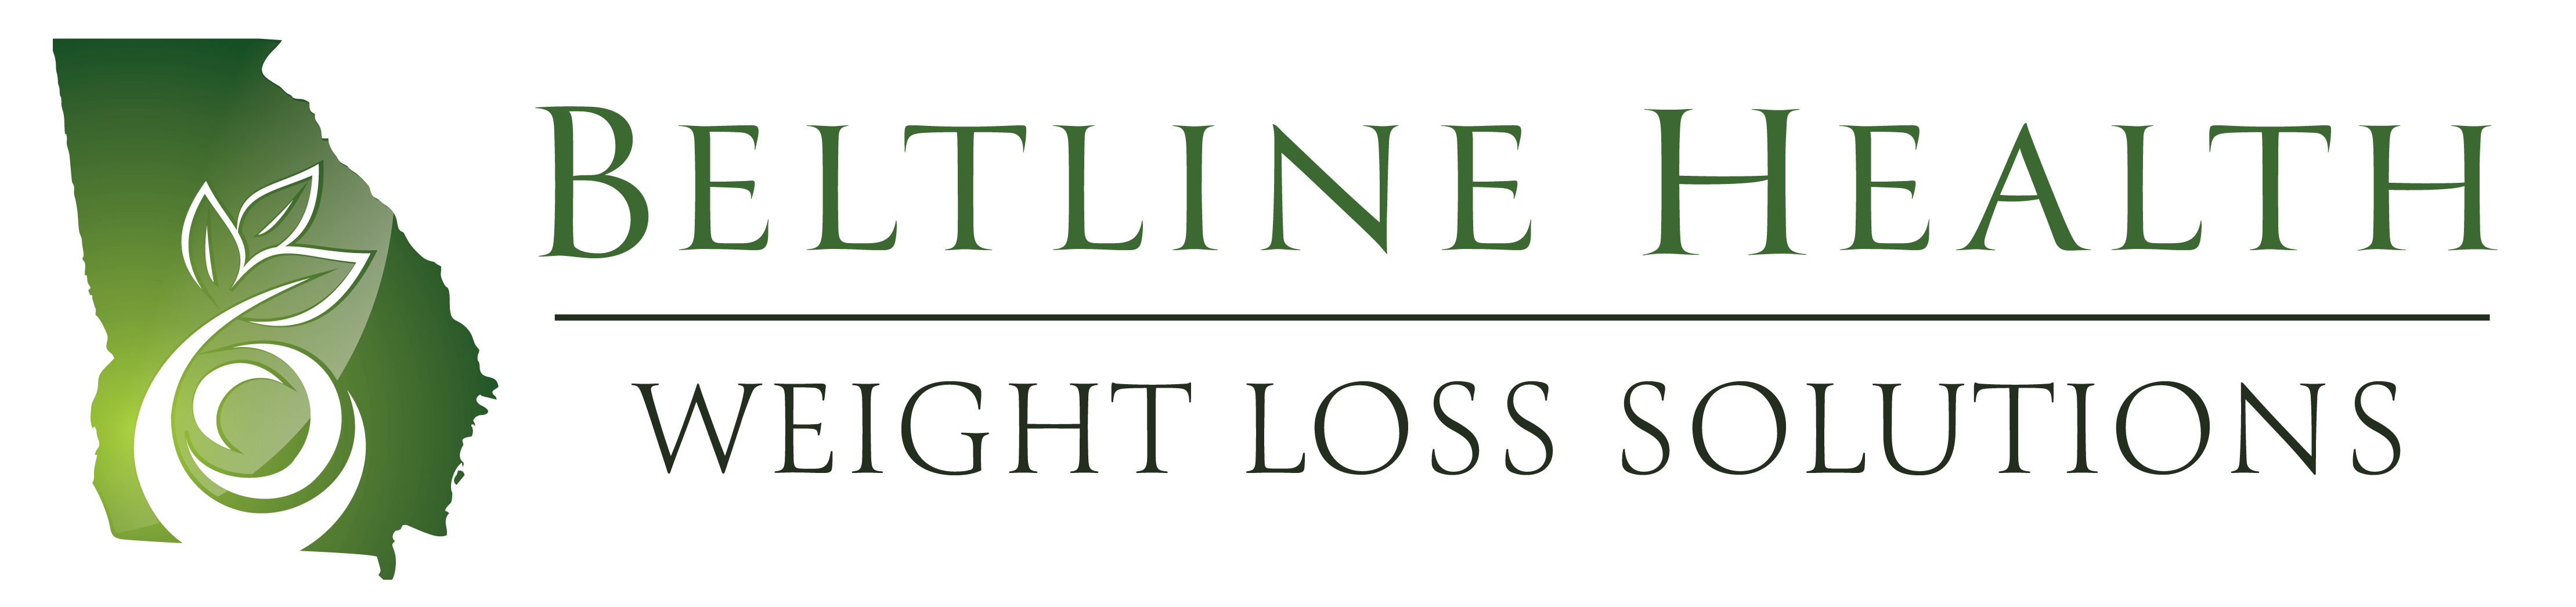 Beltline Health Weight Loss Solutions logo